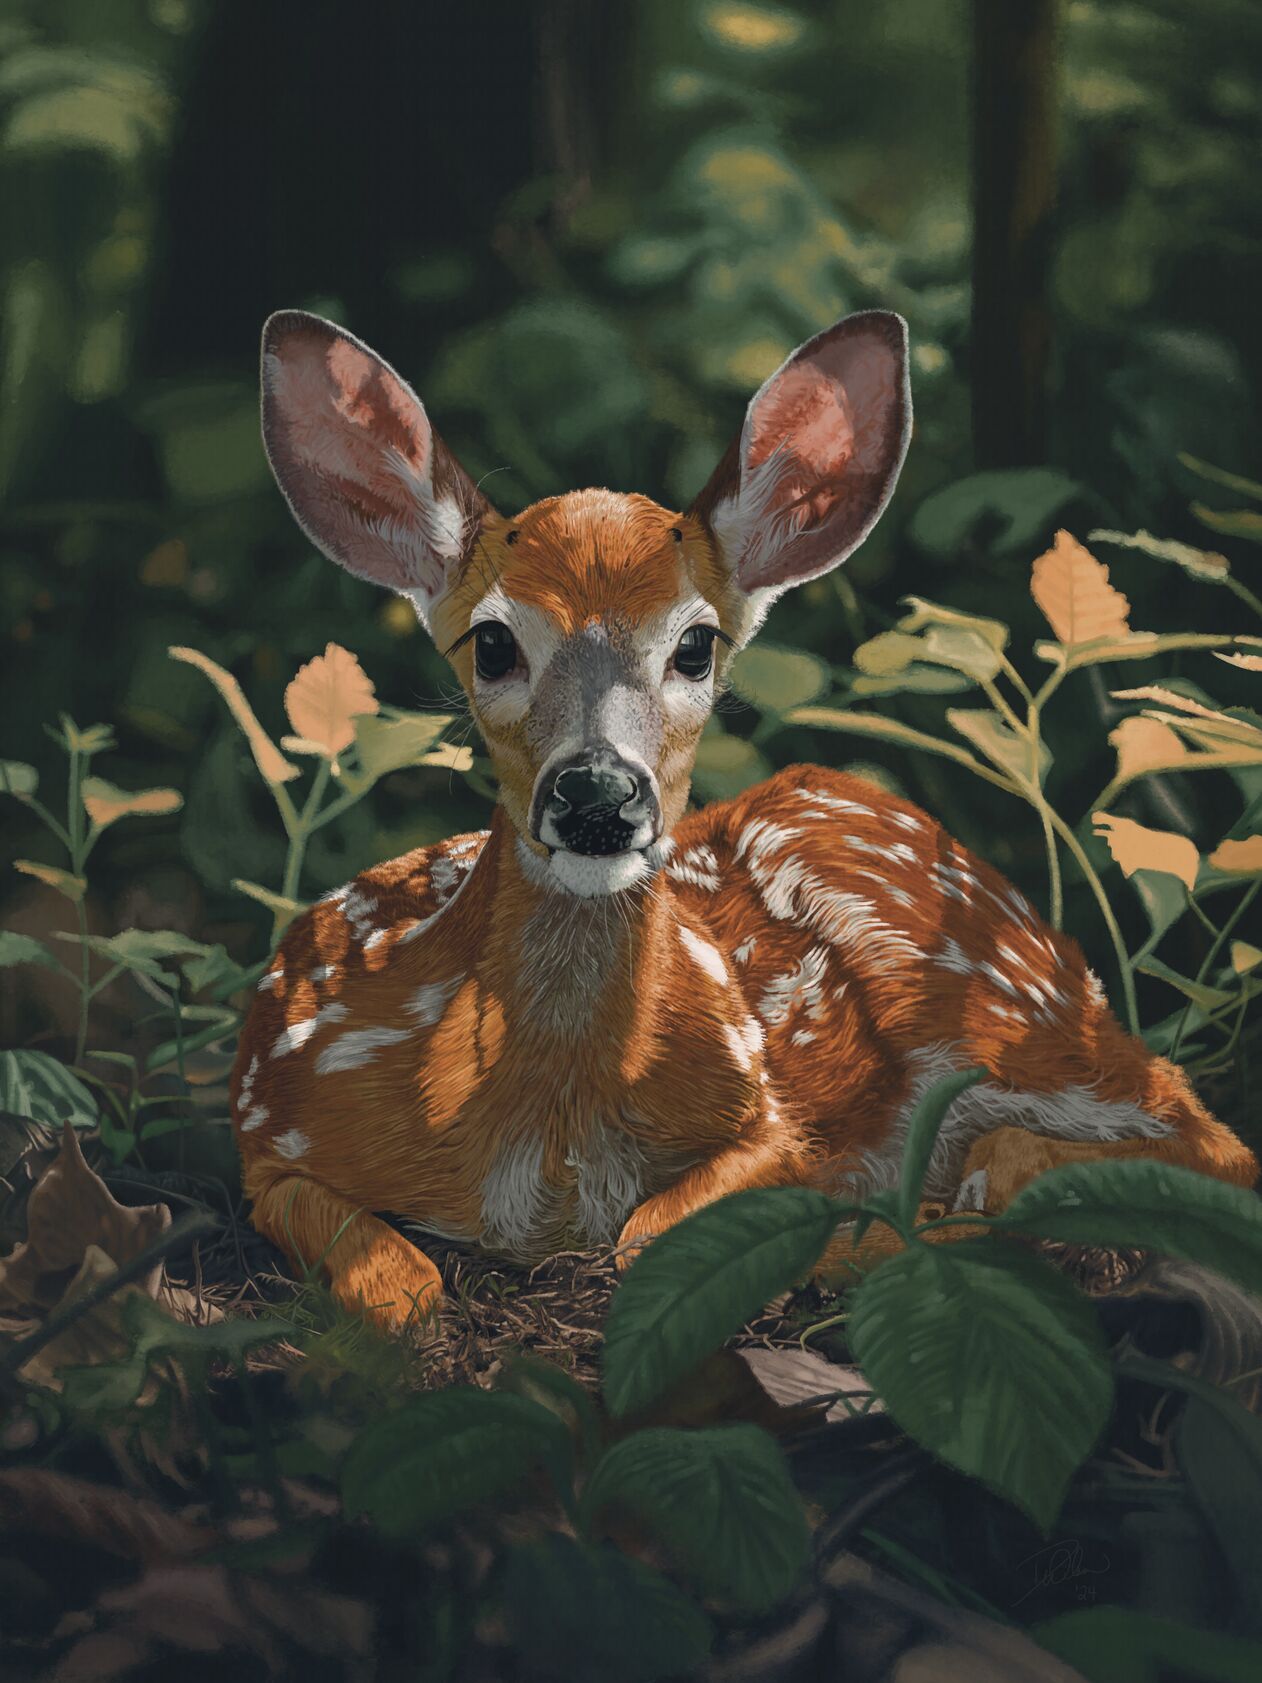 A low angle, shallow depth of field shot of a whitetail deer fawn sitting in a thick forest in dappled light